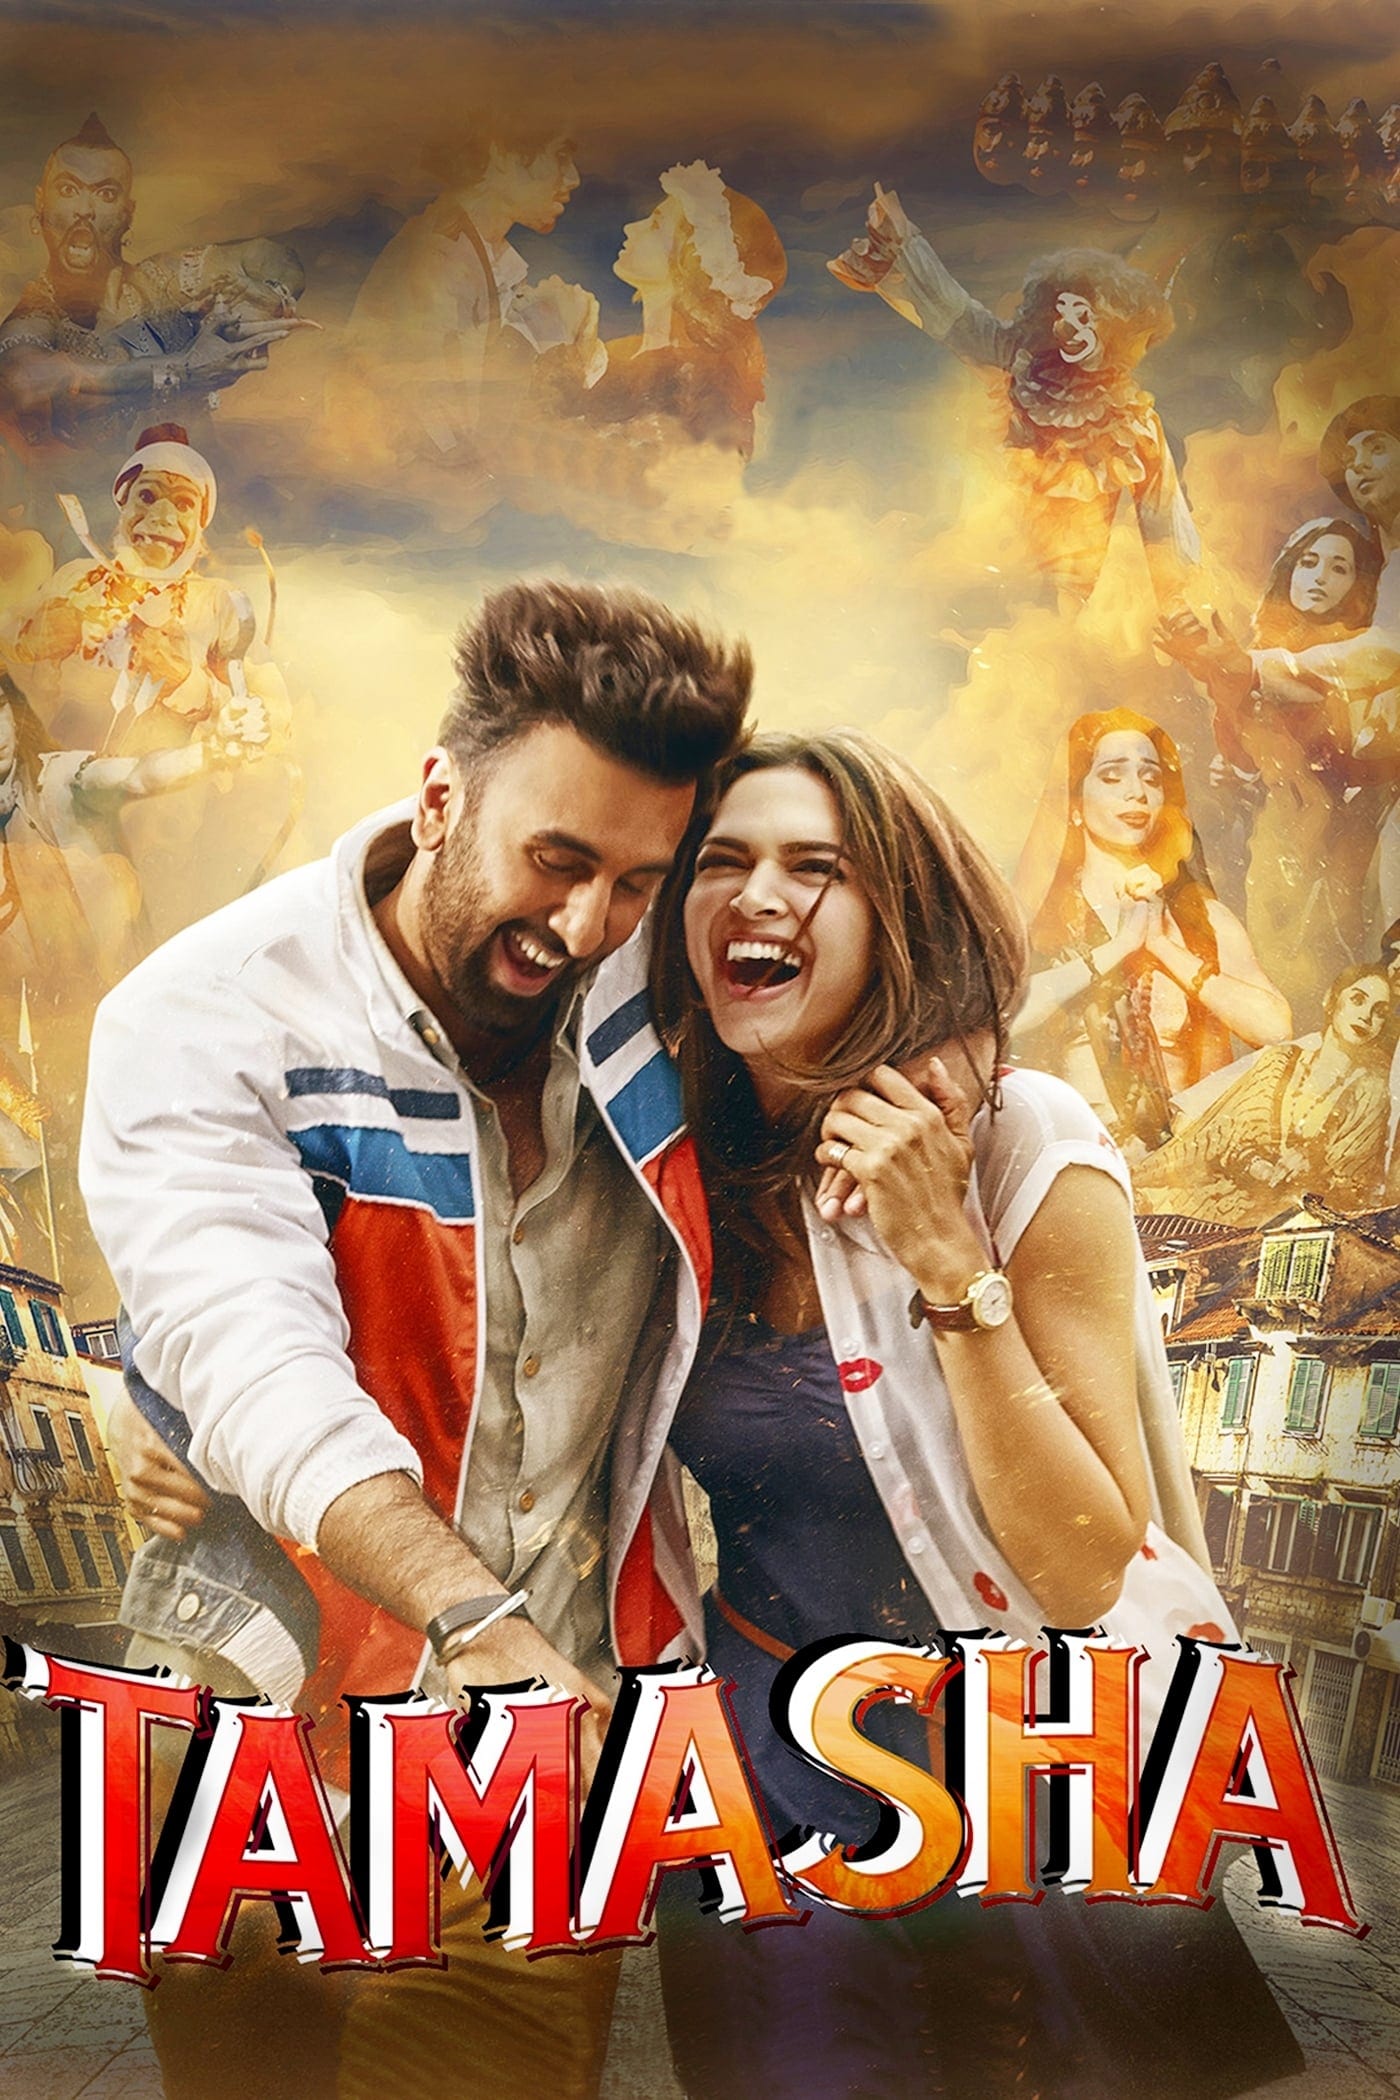 Poster for the movie "Tamasha"